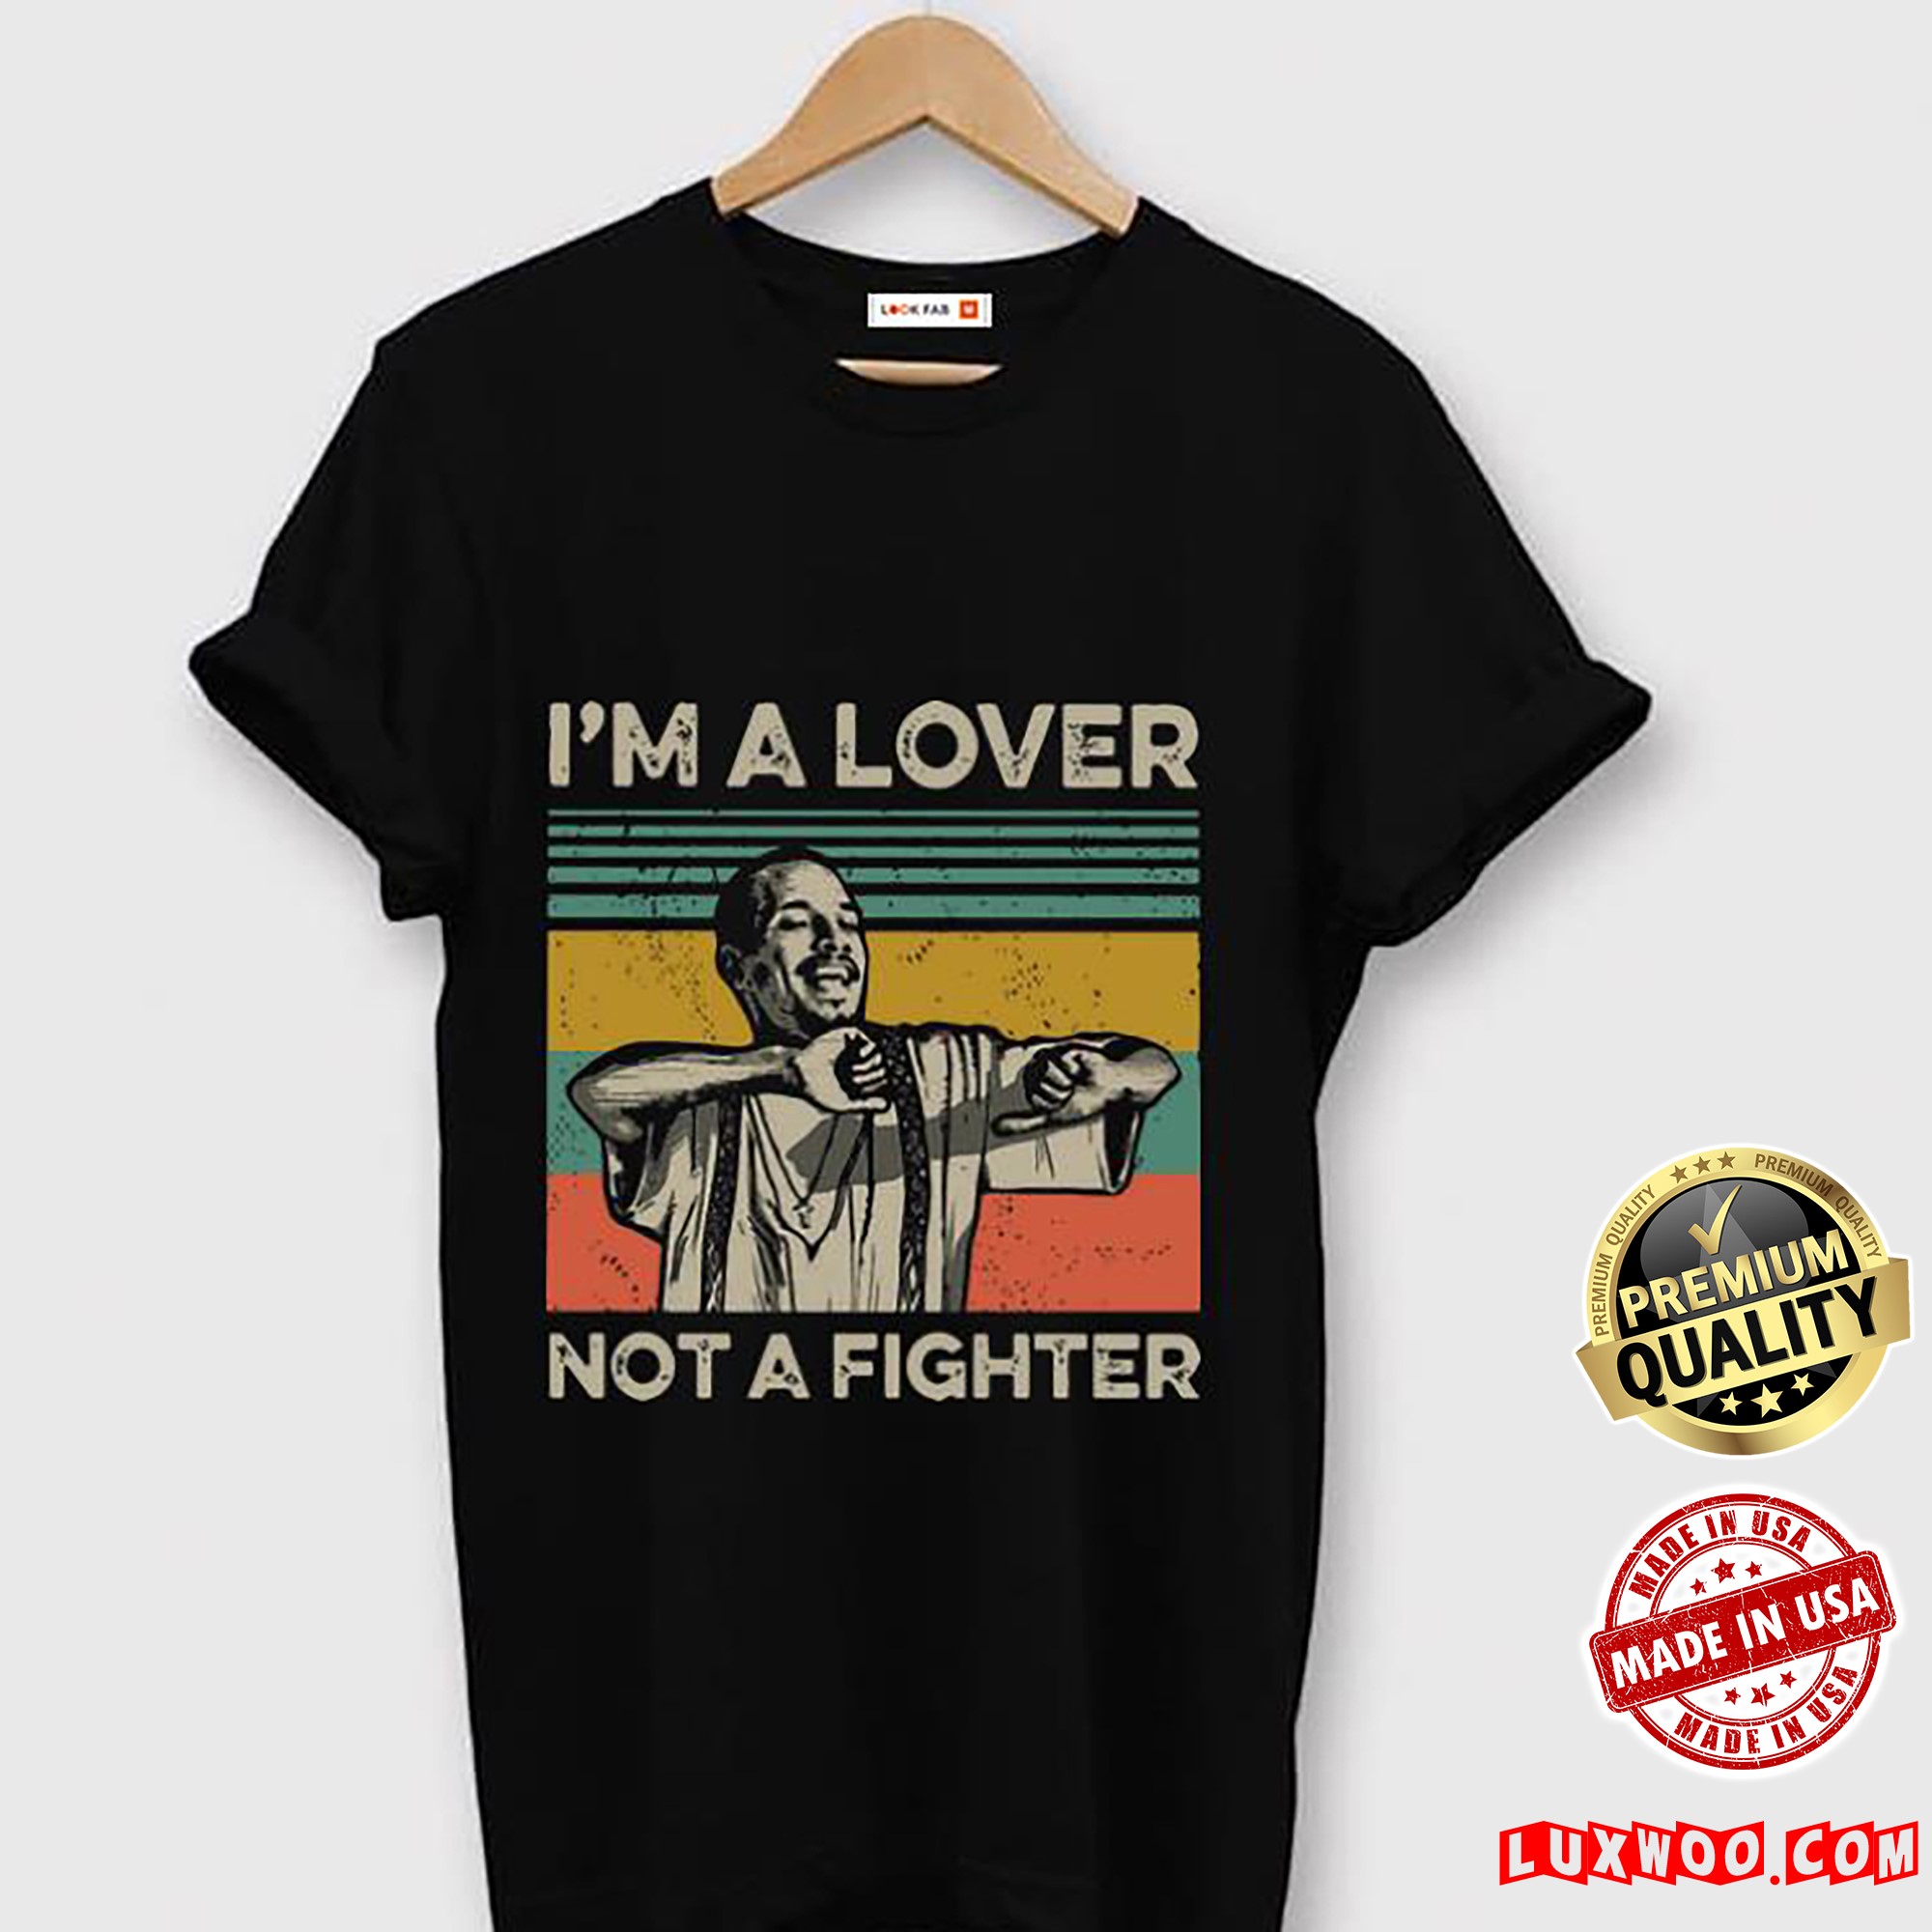 Awesome Vintage Blood In Blood Out Cruzito Im A Lover Not A Fighter Shirt